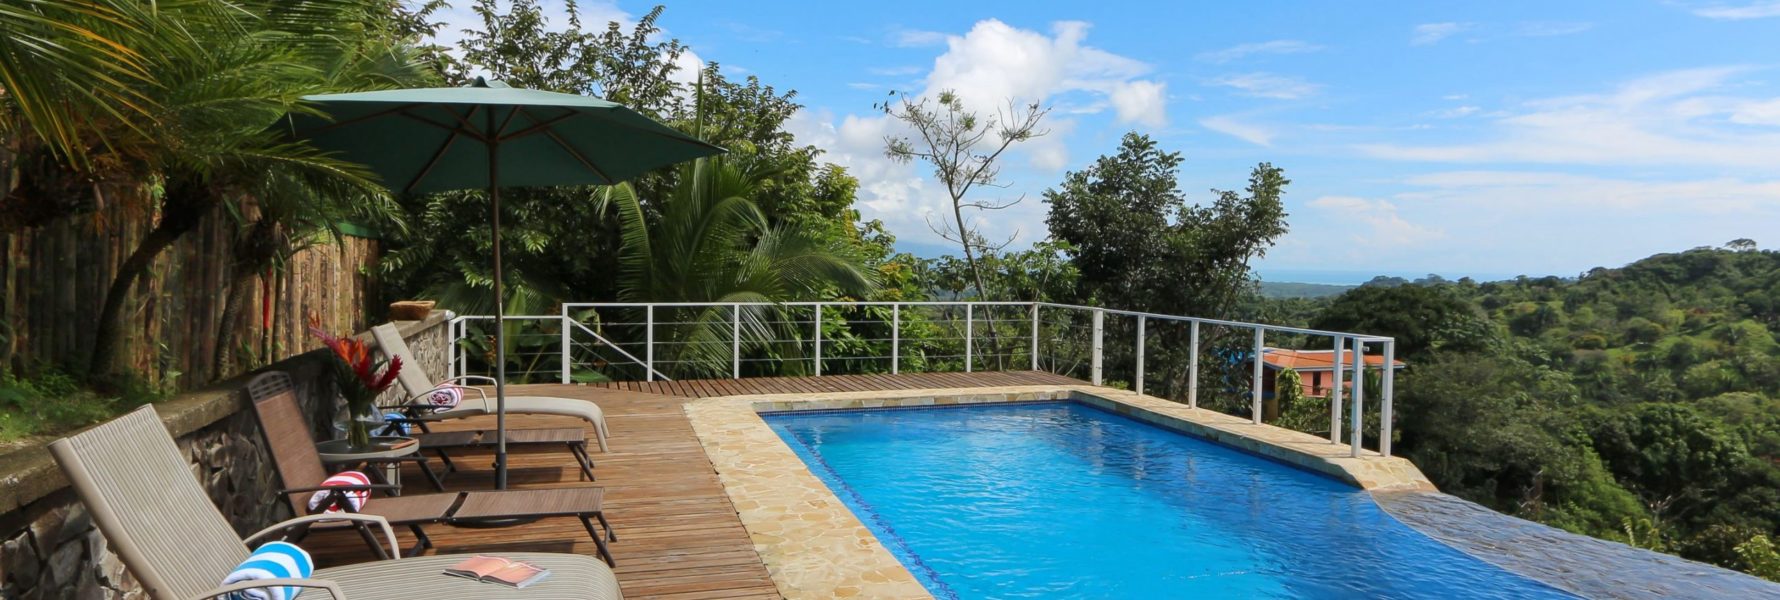 The gorgeous pool and deck area floats out over the treetops of the rainforest below.